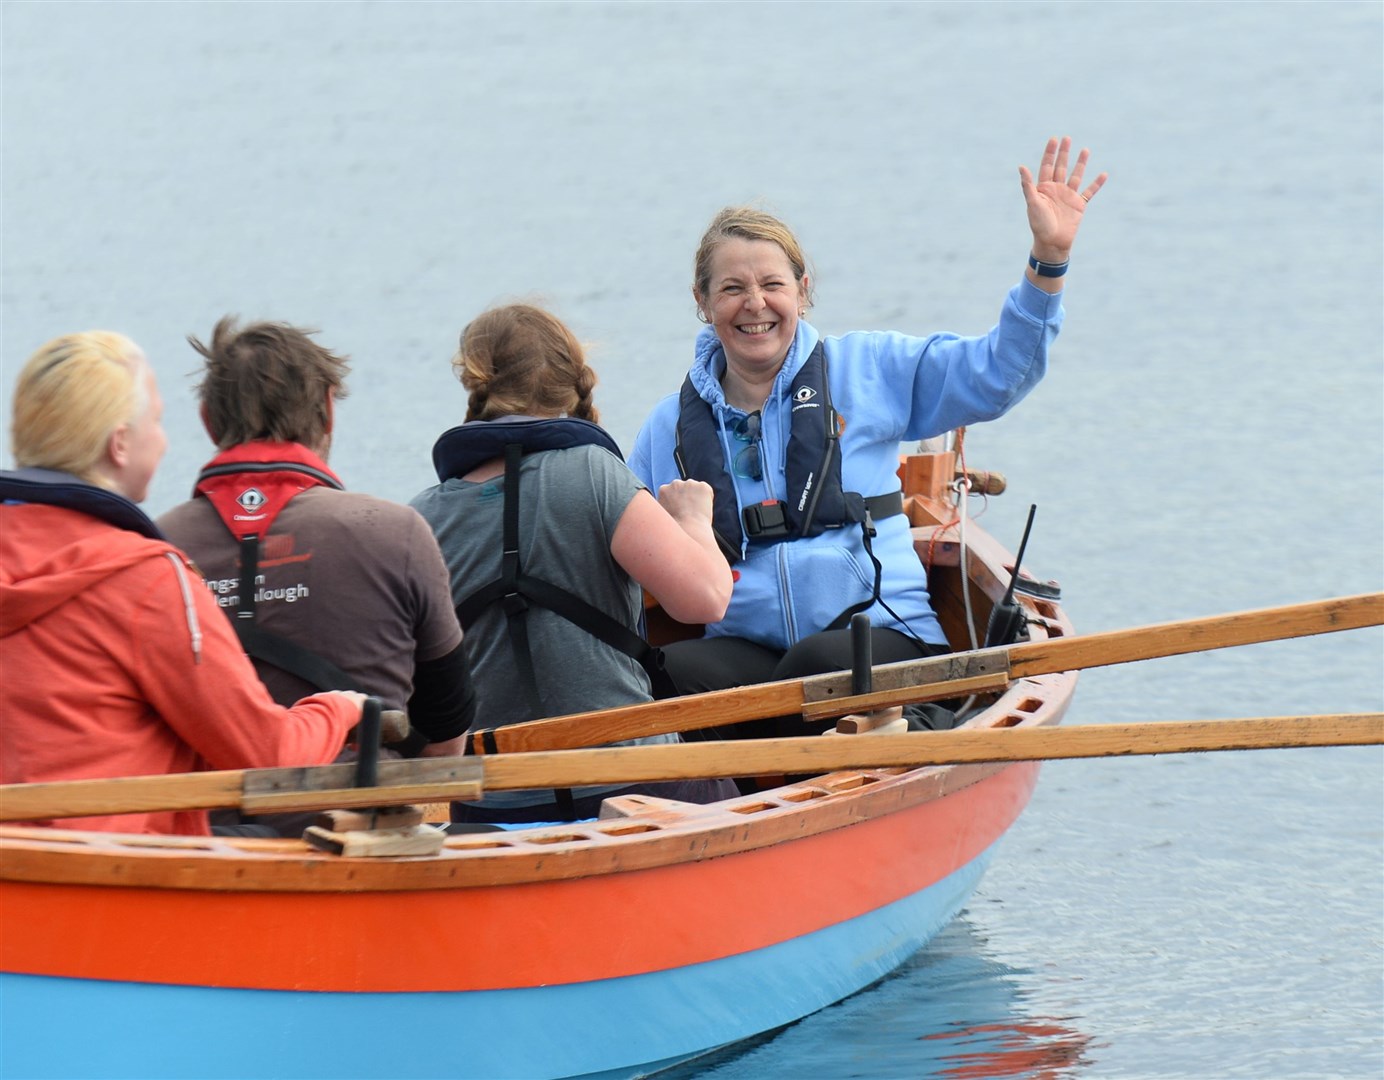 Hazel Inglis,cox on the Strathpeffer skiff, waves to get first leg under way. Picture Gary Anthony